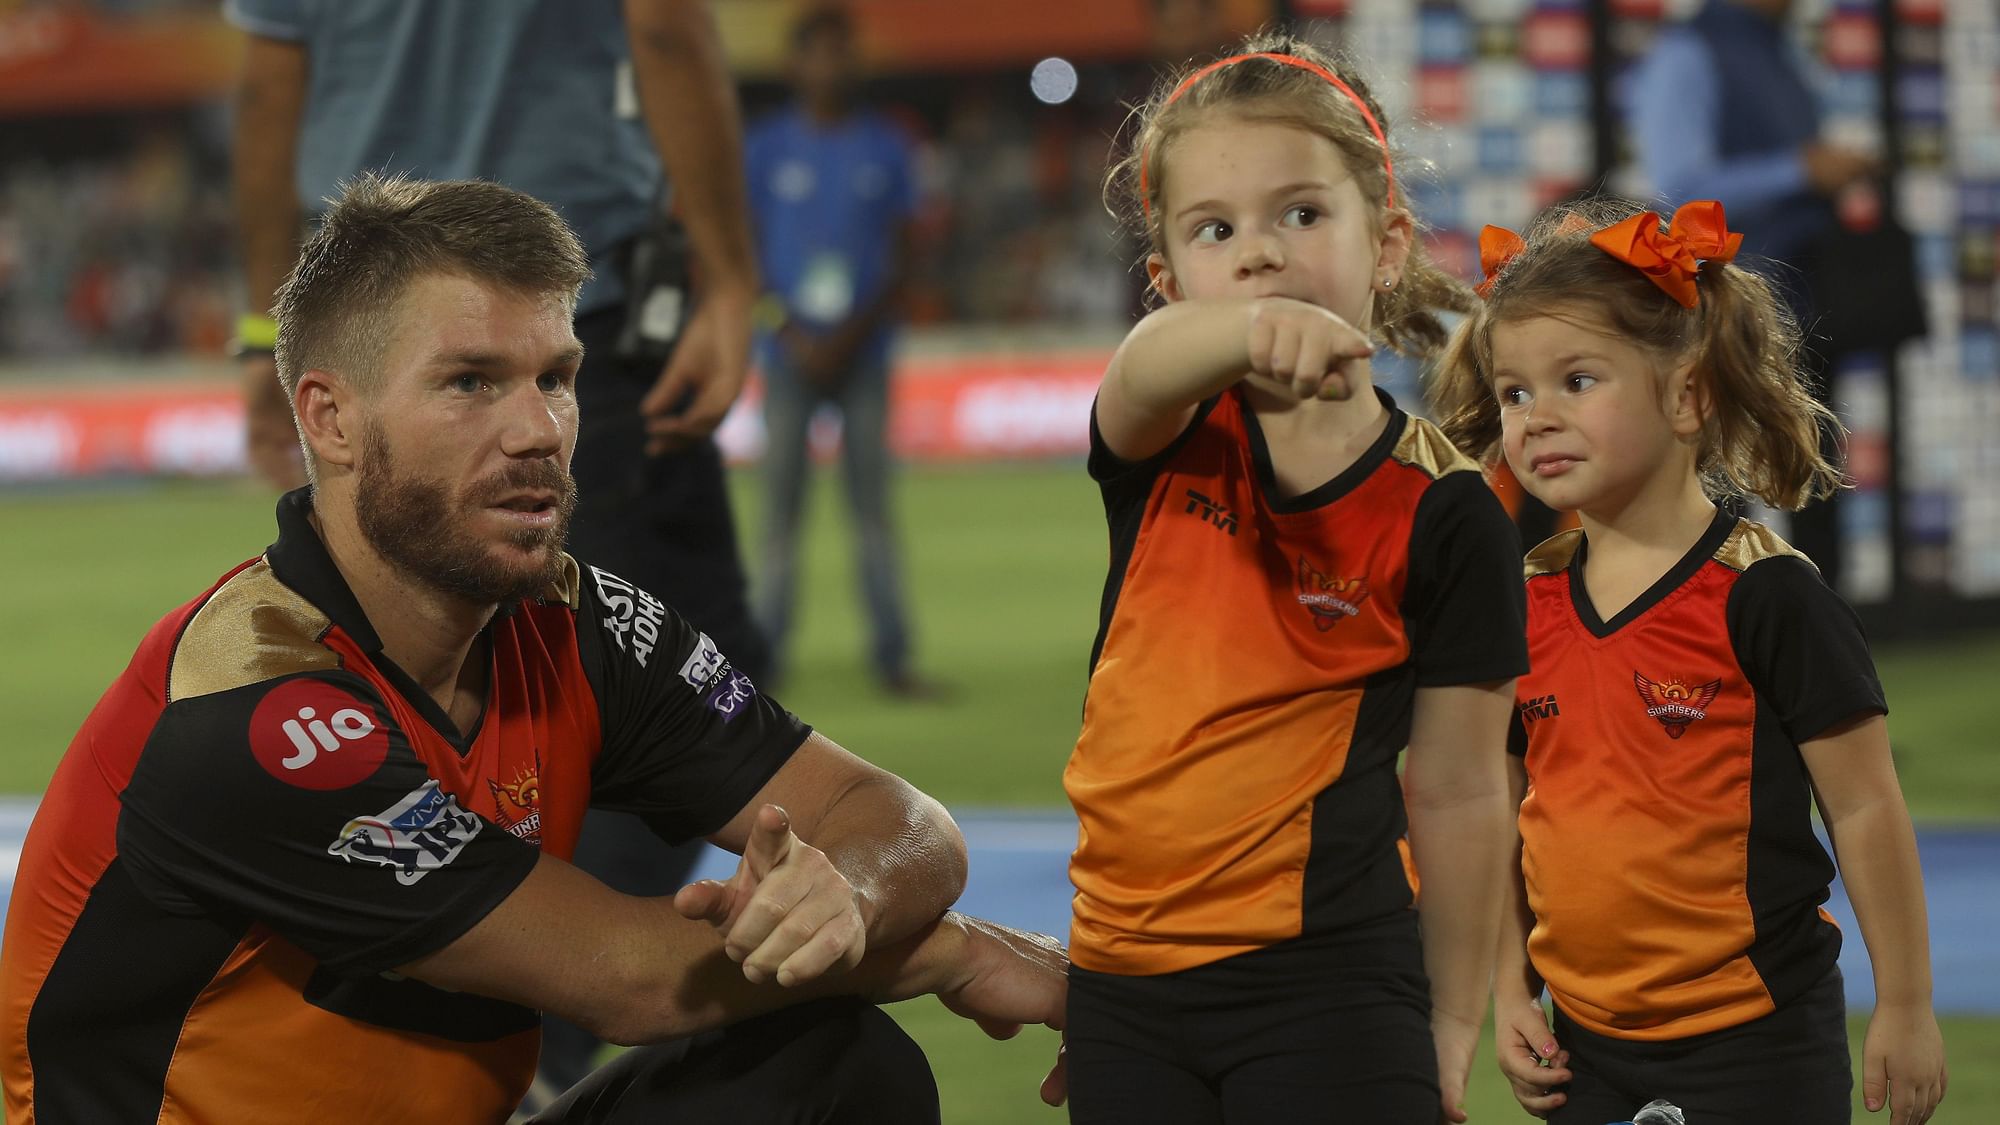 David Warner with his daughters after an IPL 2019 fixture in Hyderabad.